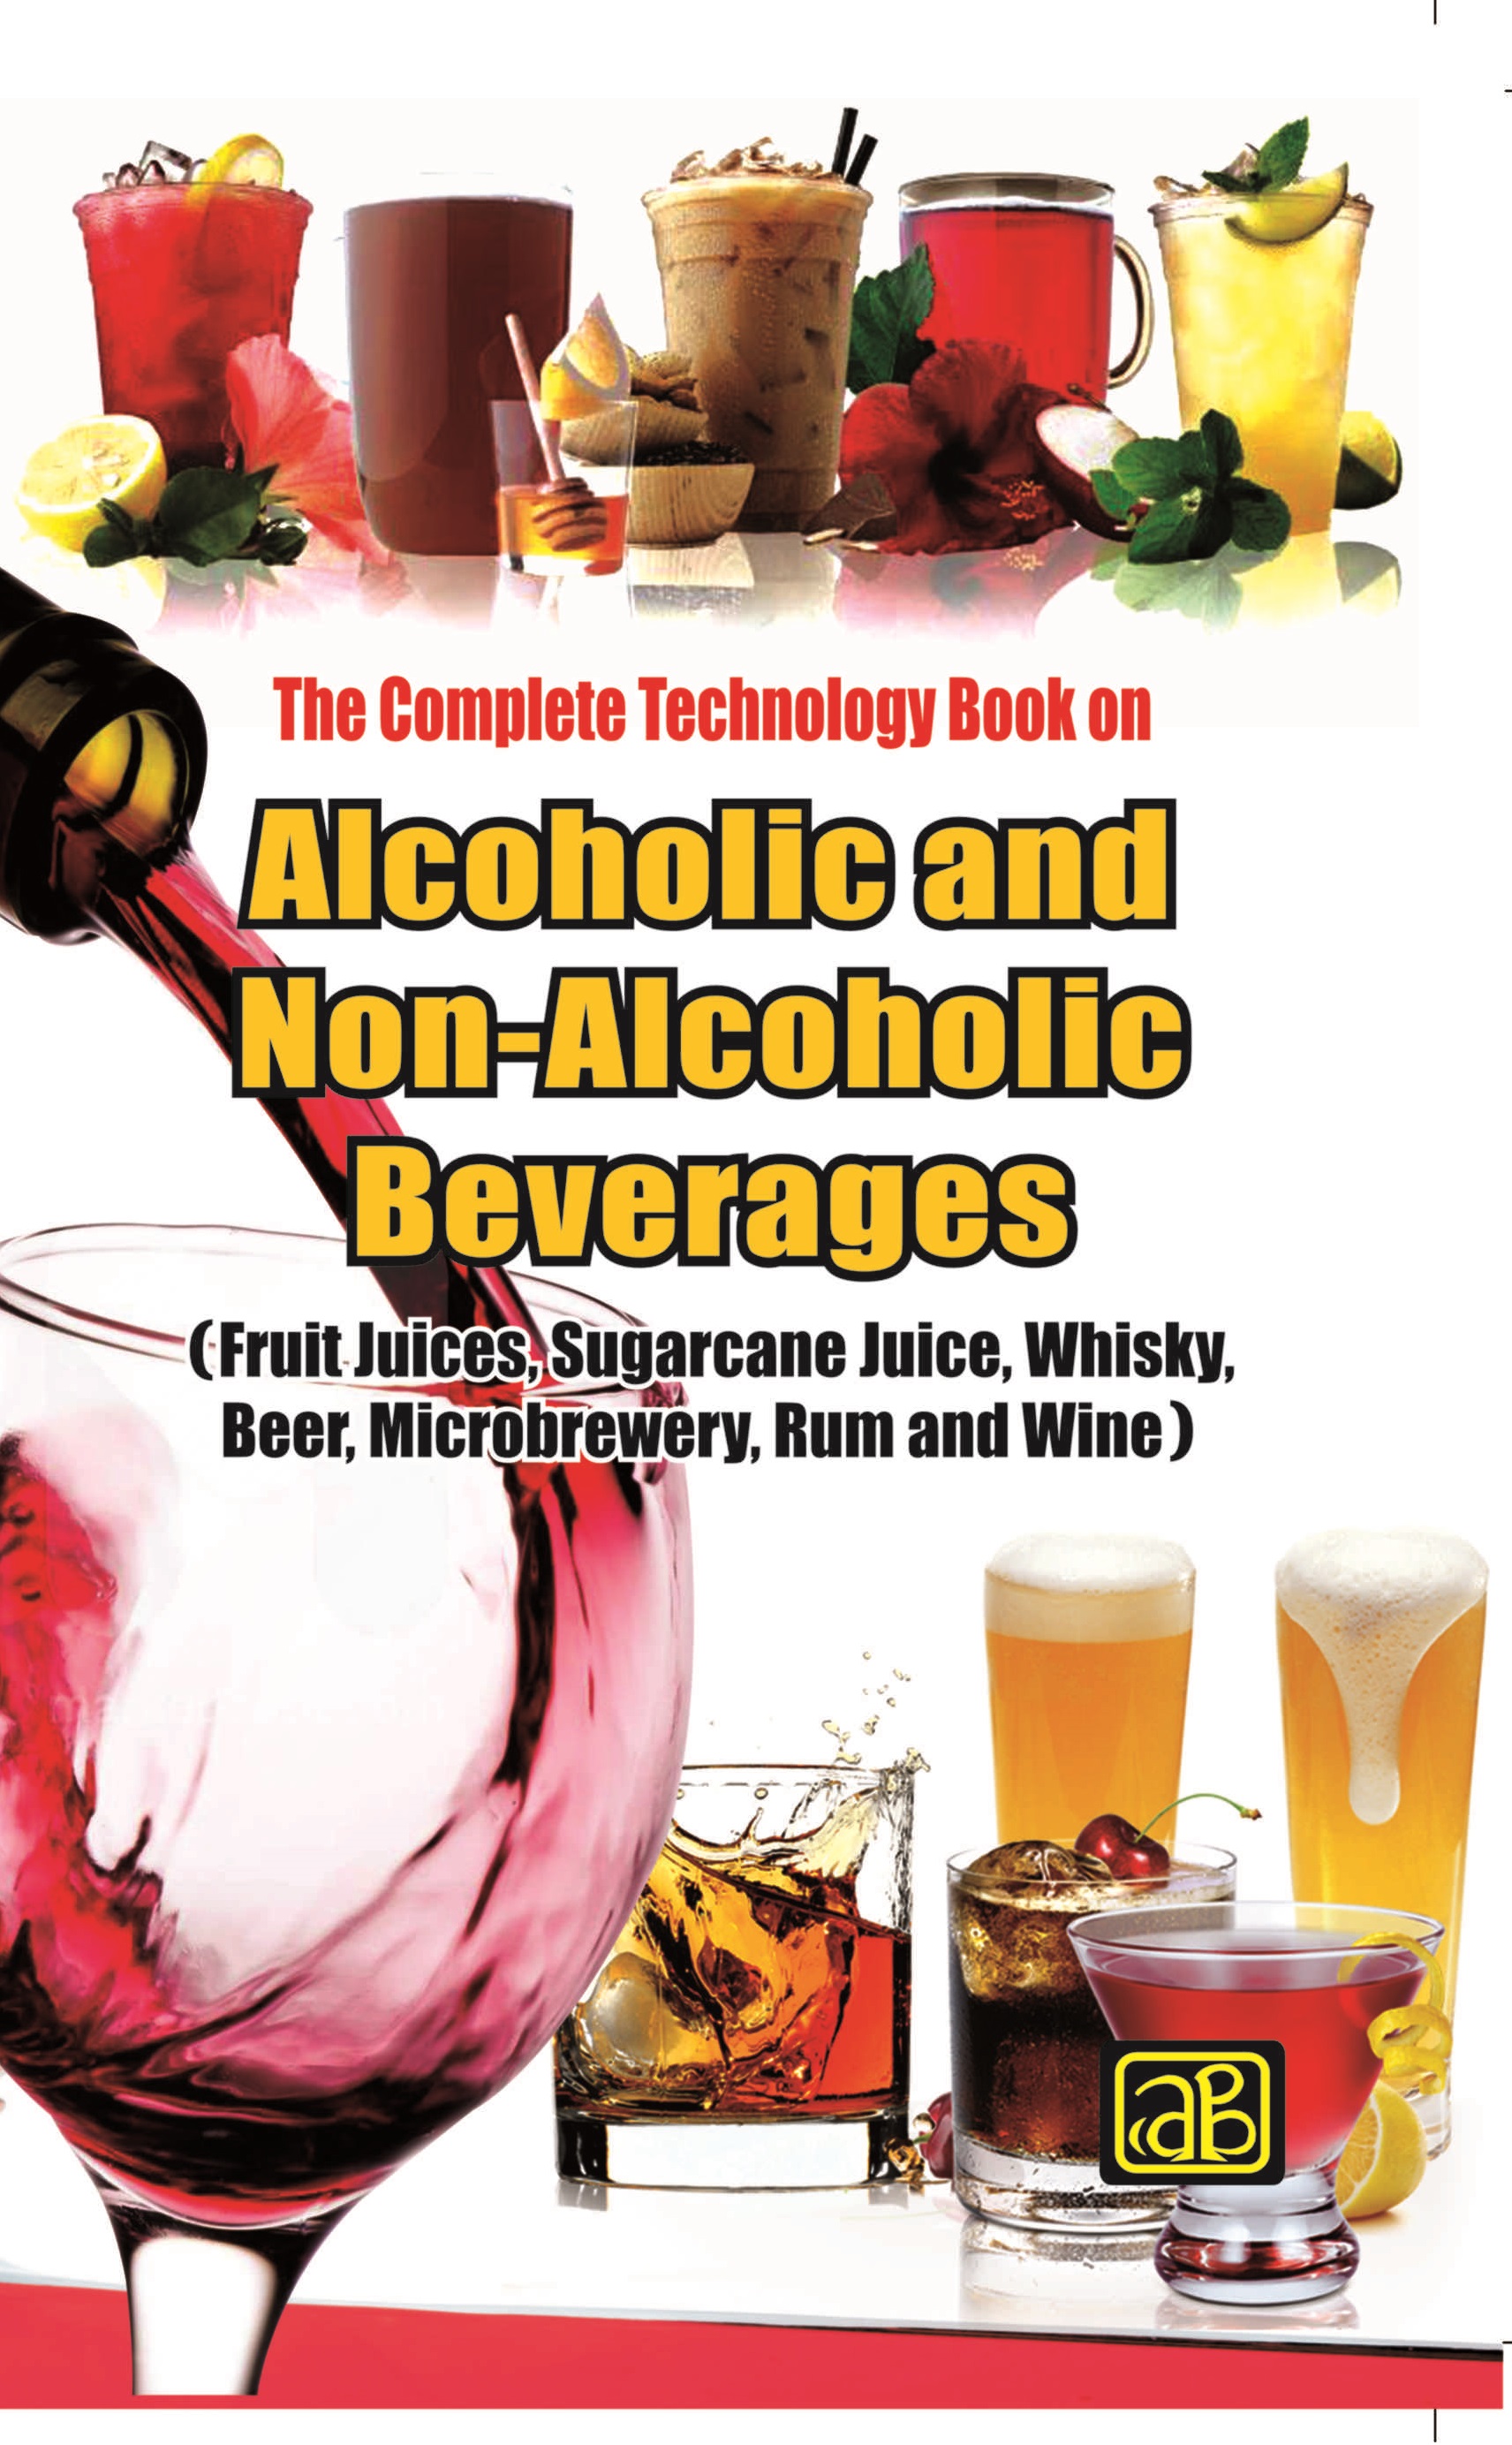 The Complete Technology Book on  Alcoholic and Non-Alcoholic Beverages (2nd Revised Edition)  (Fruit Juices, Sugarcane Juice, Whisky, Beer, Microbrewery, Rum and Wine)